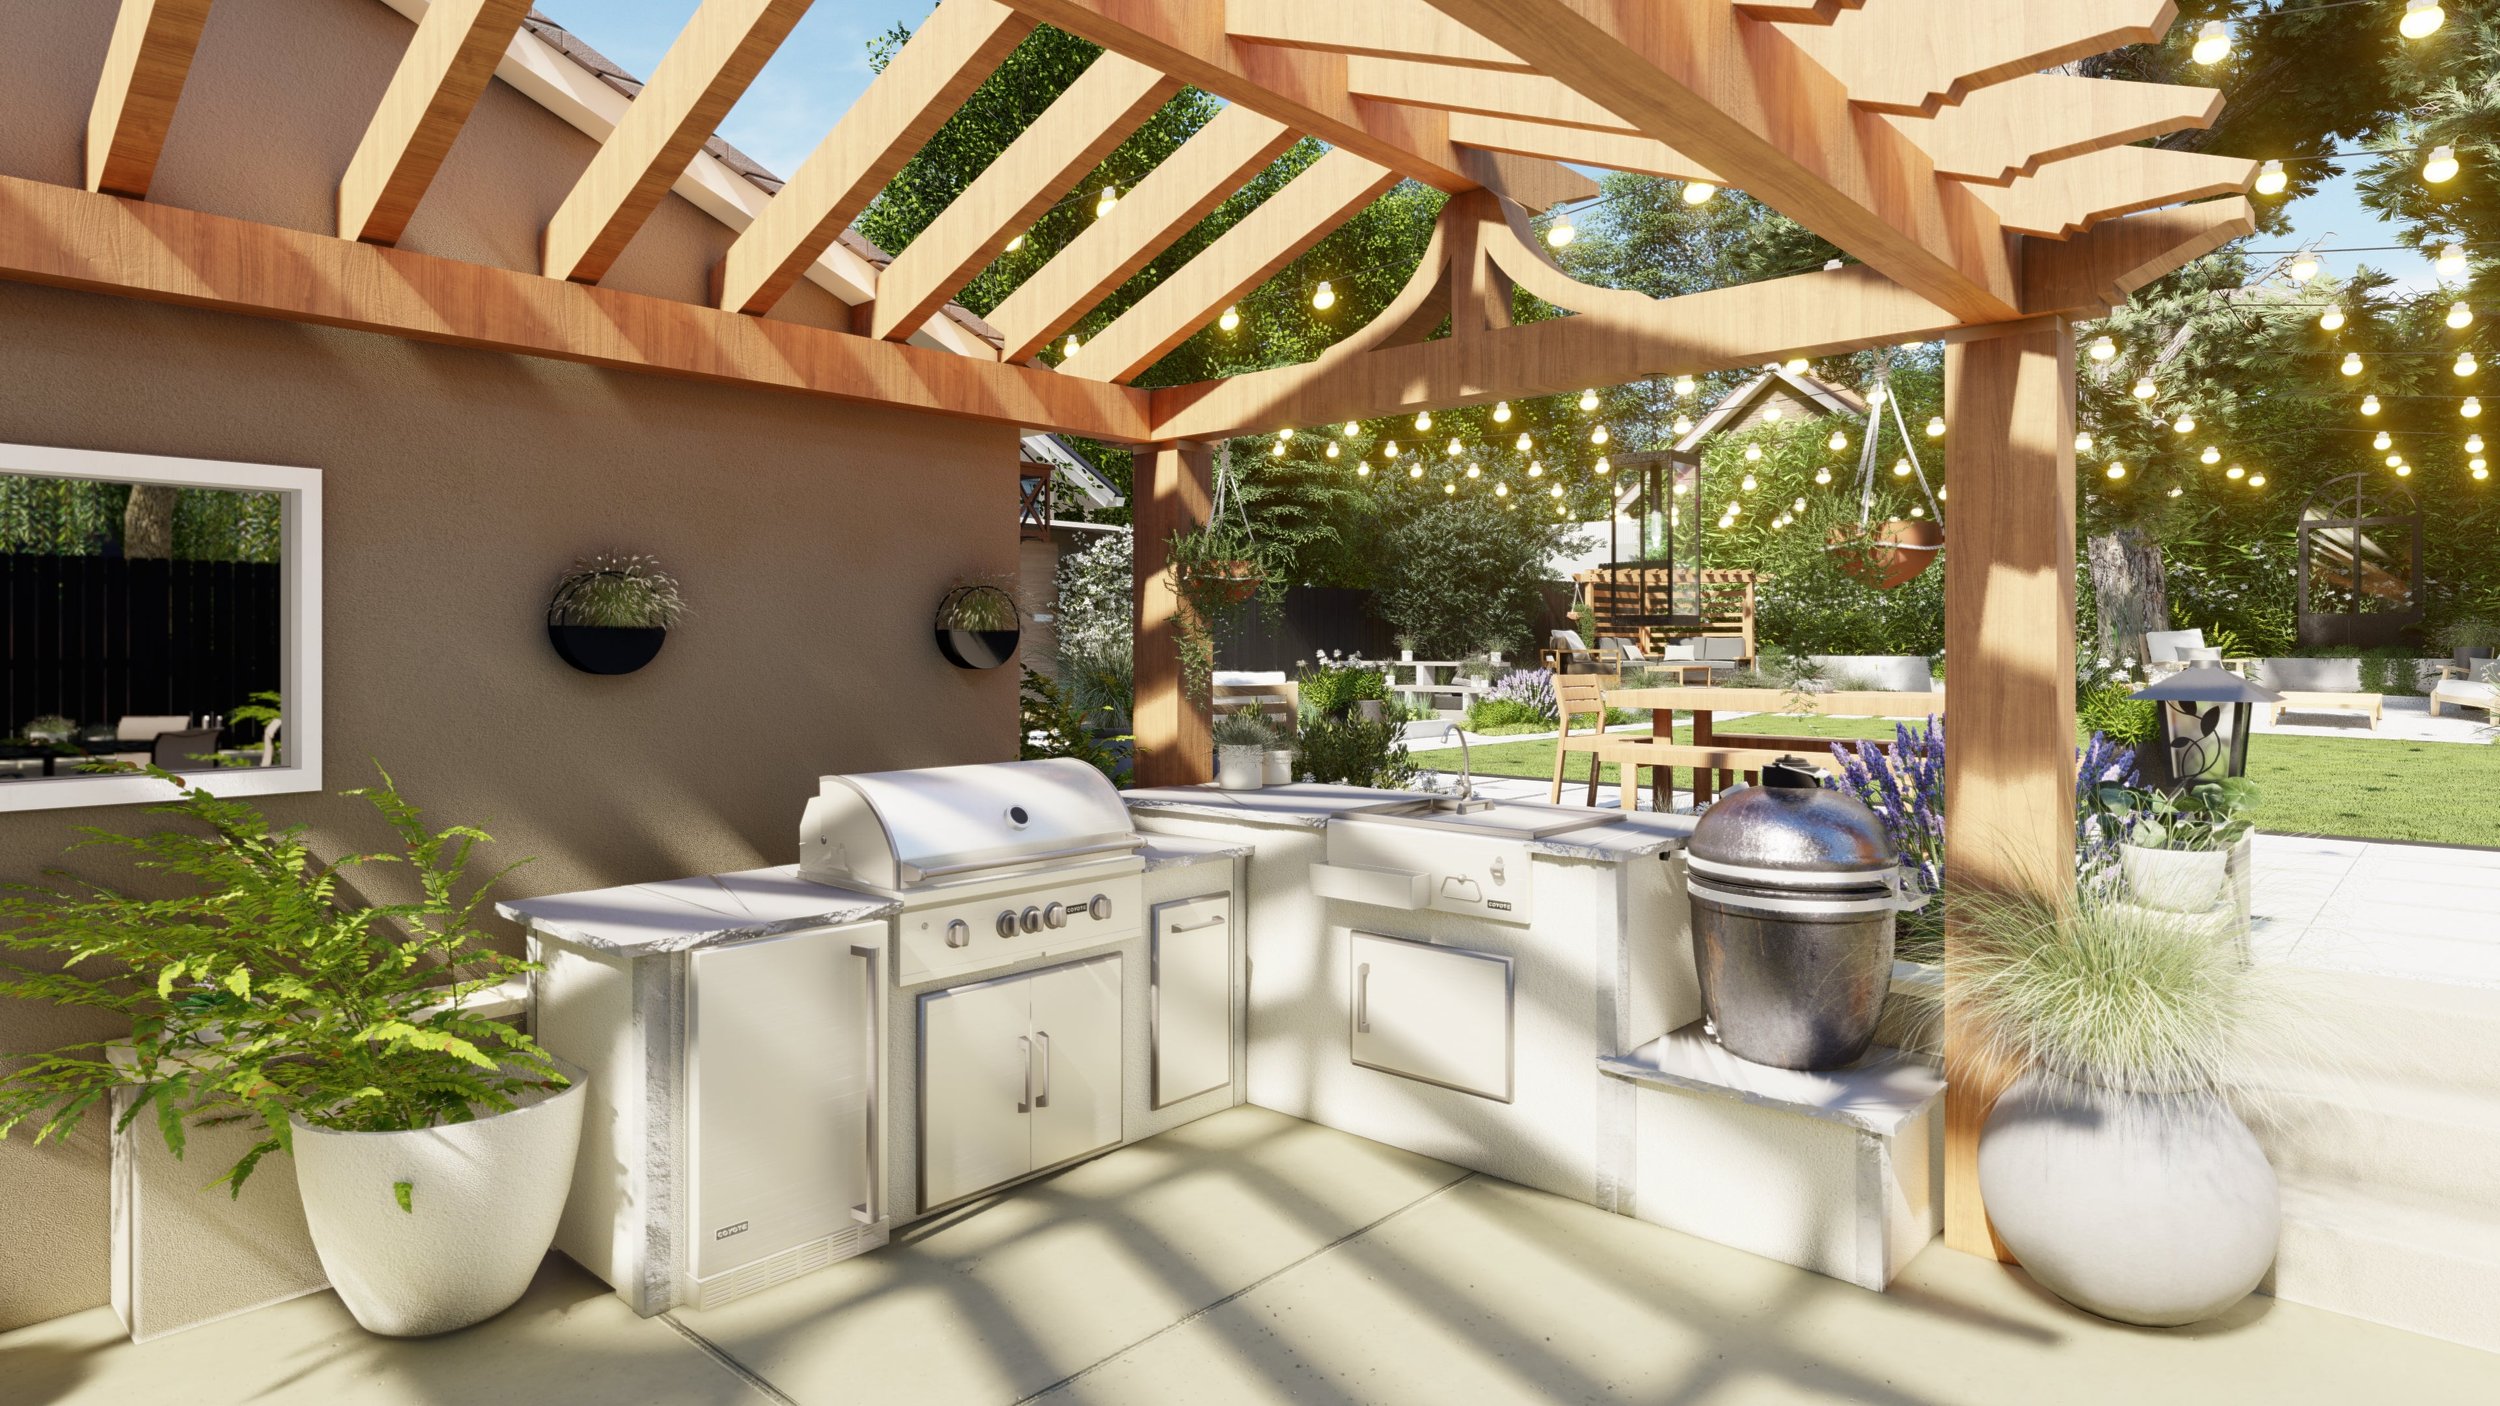 Traditional arched pergola over an outdoor kitchen